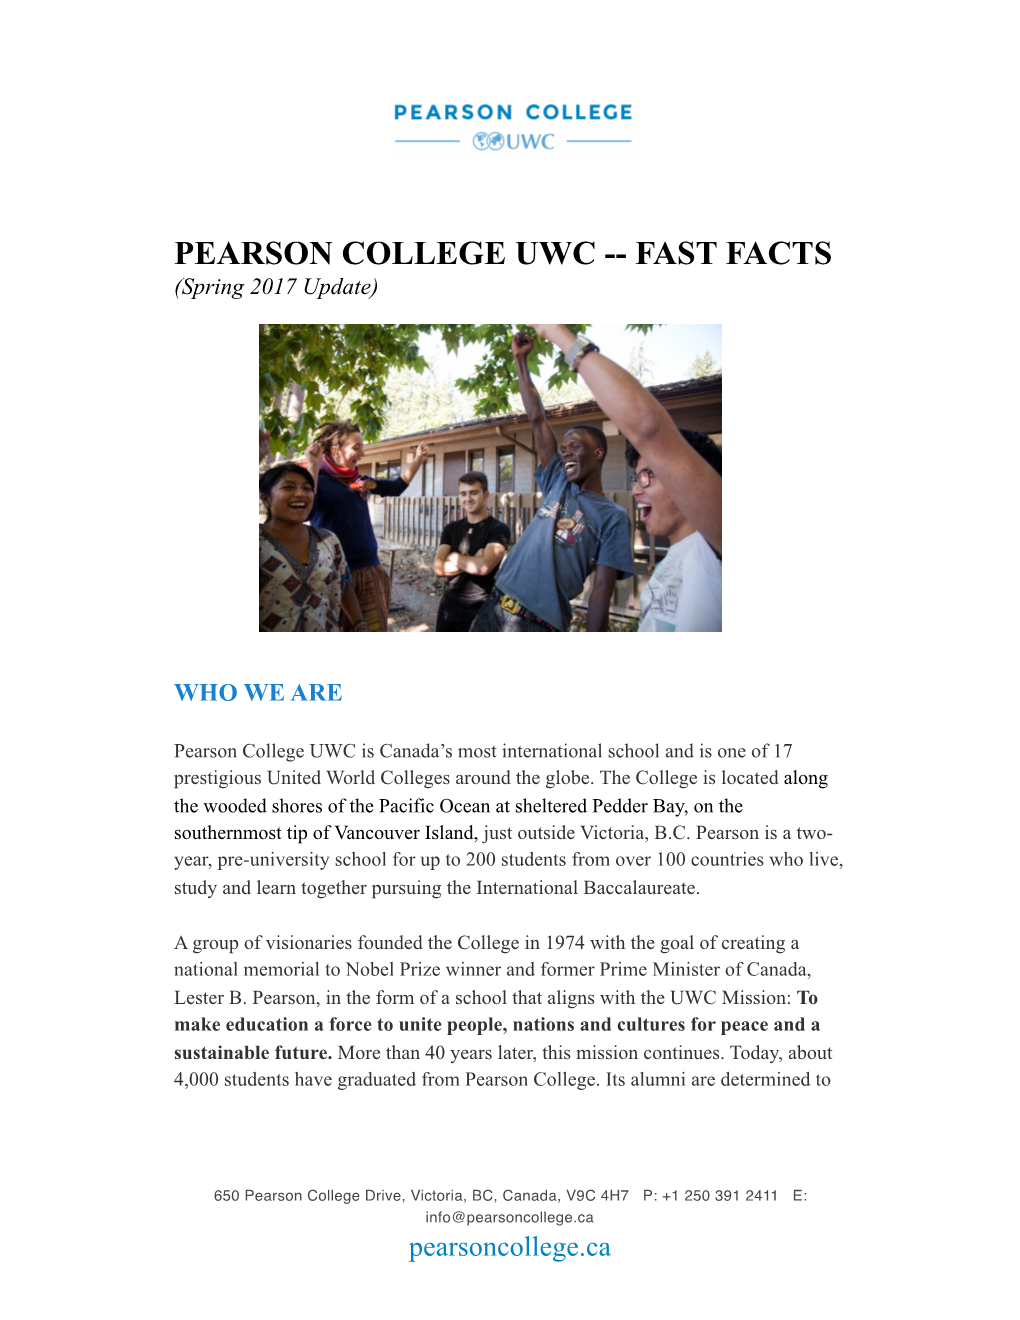 Pearson College Fast Facts (Spring 2017)